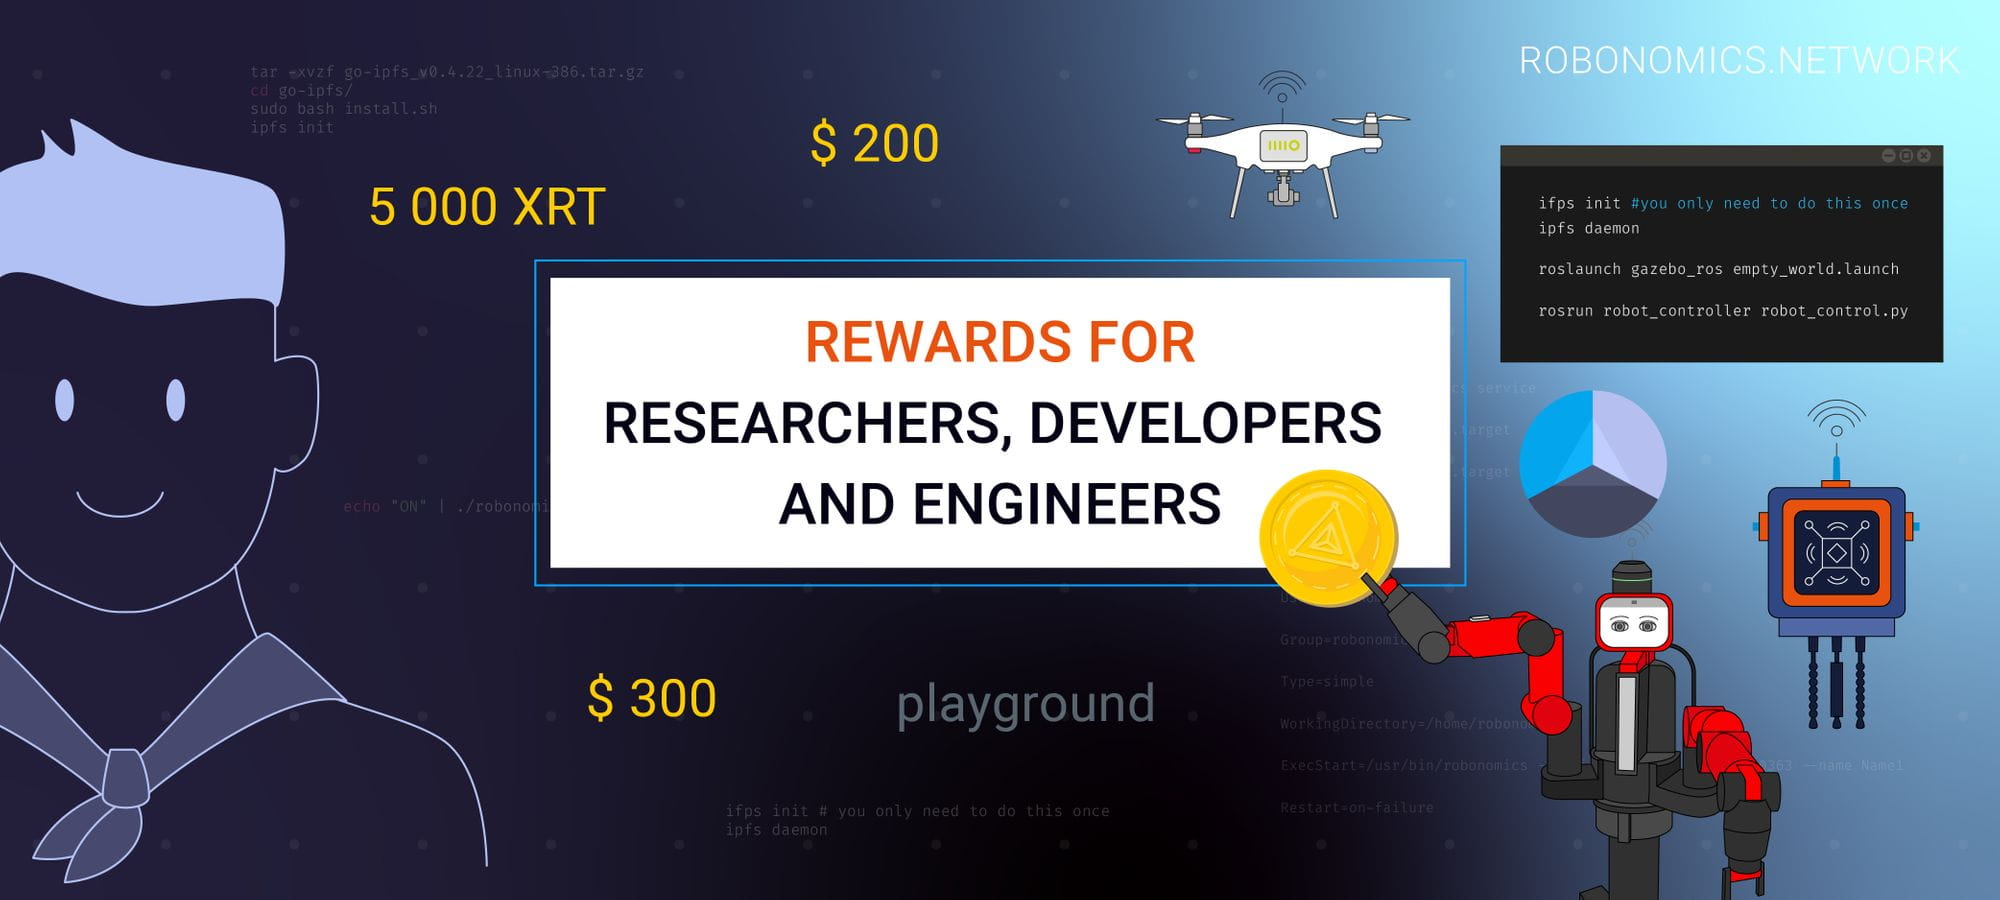 Rewards for researchers, developers and engineers